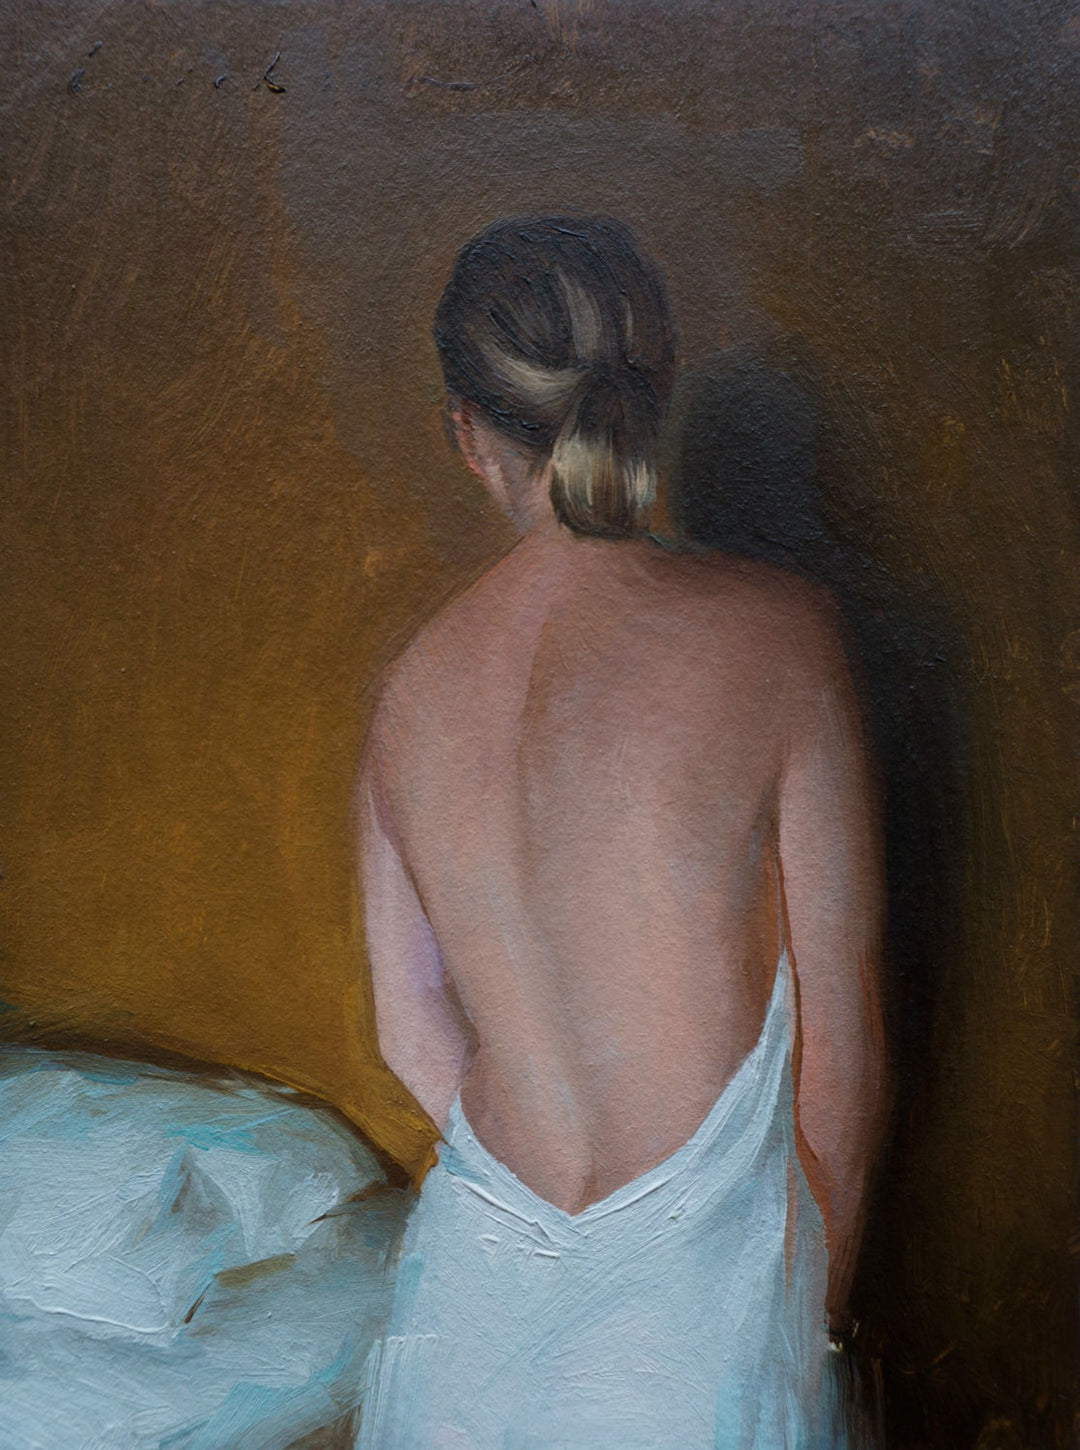 An oil painting of a woman in a white towel with touches of yellow and green by Cody Erickson - "Yellow and Green" from the brand Cody Erickson.